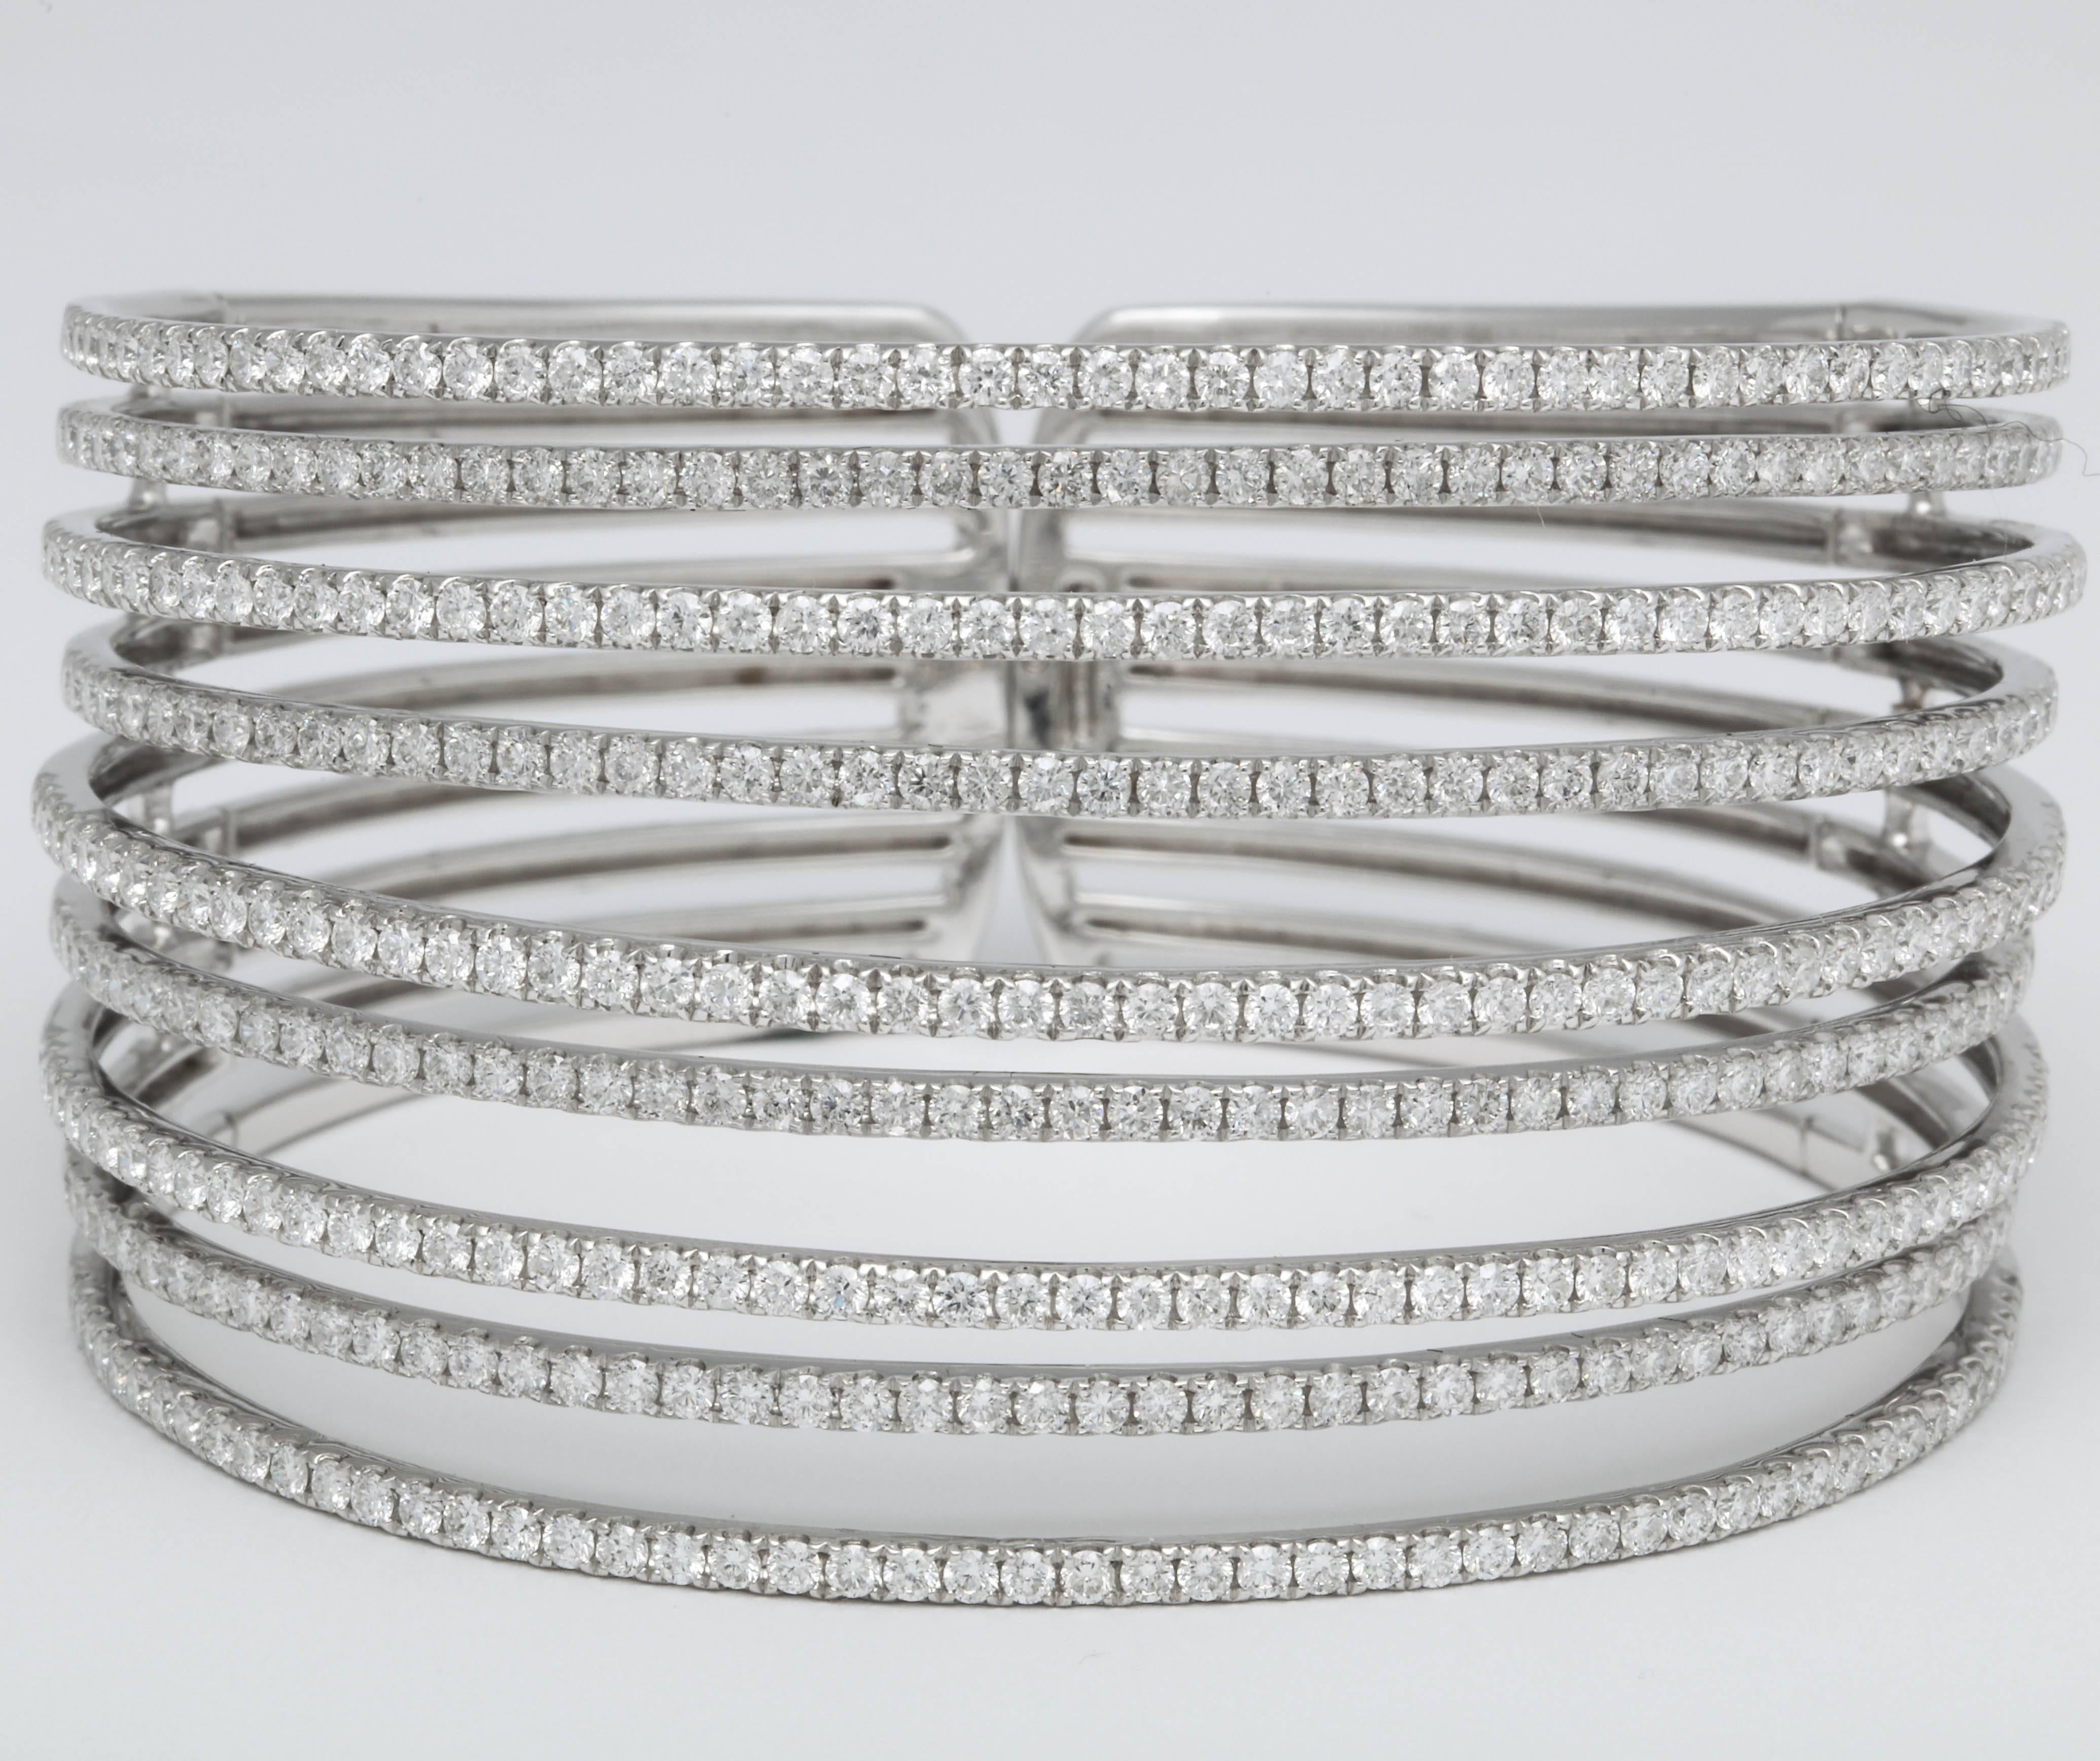 
A beautiful and wearable piece!!

9 lines of white round brilliant cut diamonds set at two different heights -- this bangle was exceptionally designed.

7.75 carats of white round brilliant cut diamonds set in 18k white gold 

Approximately 1.57